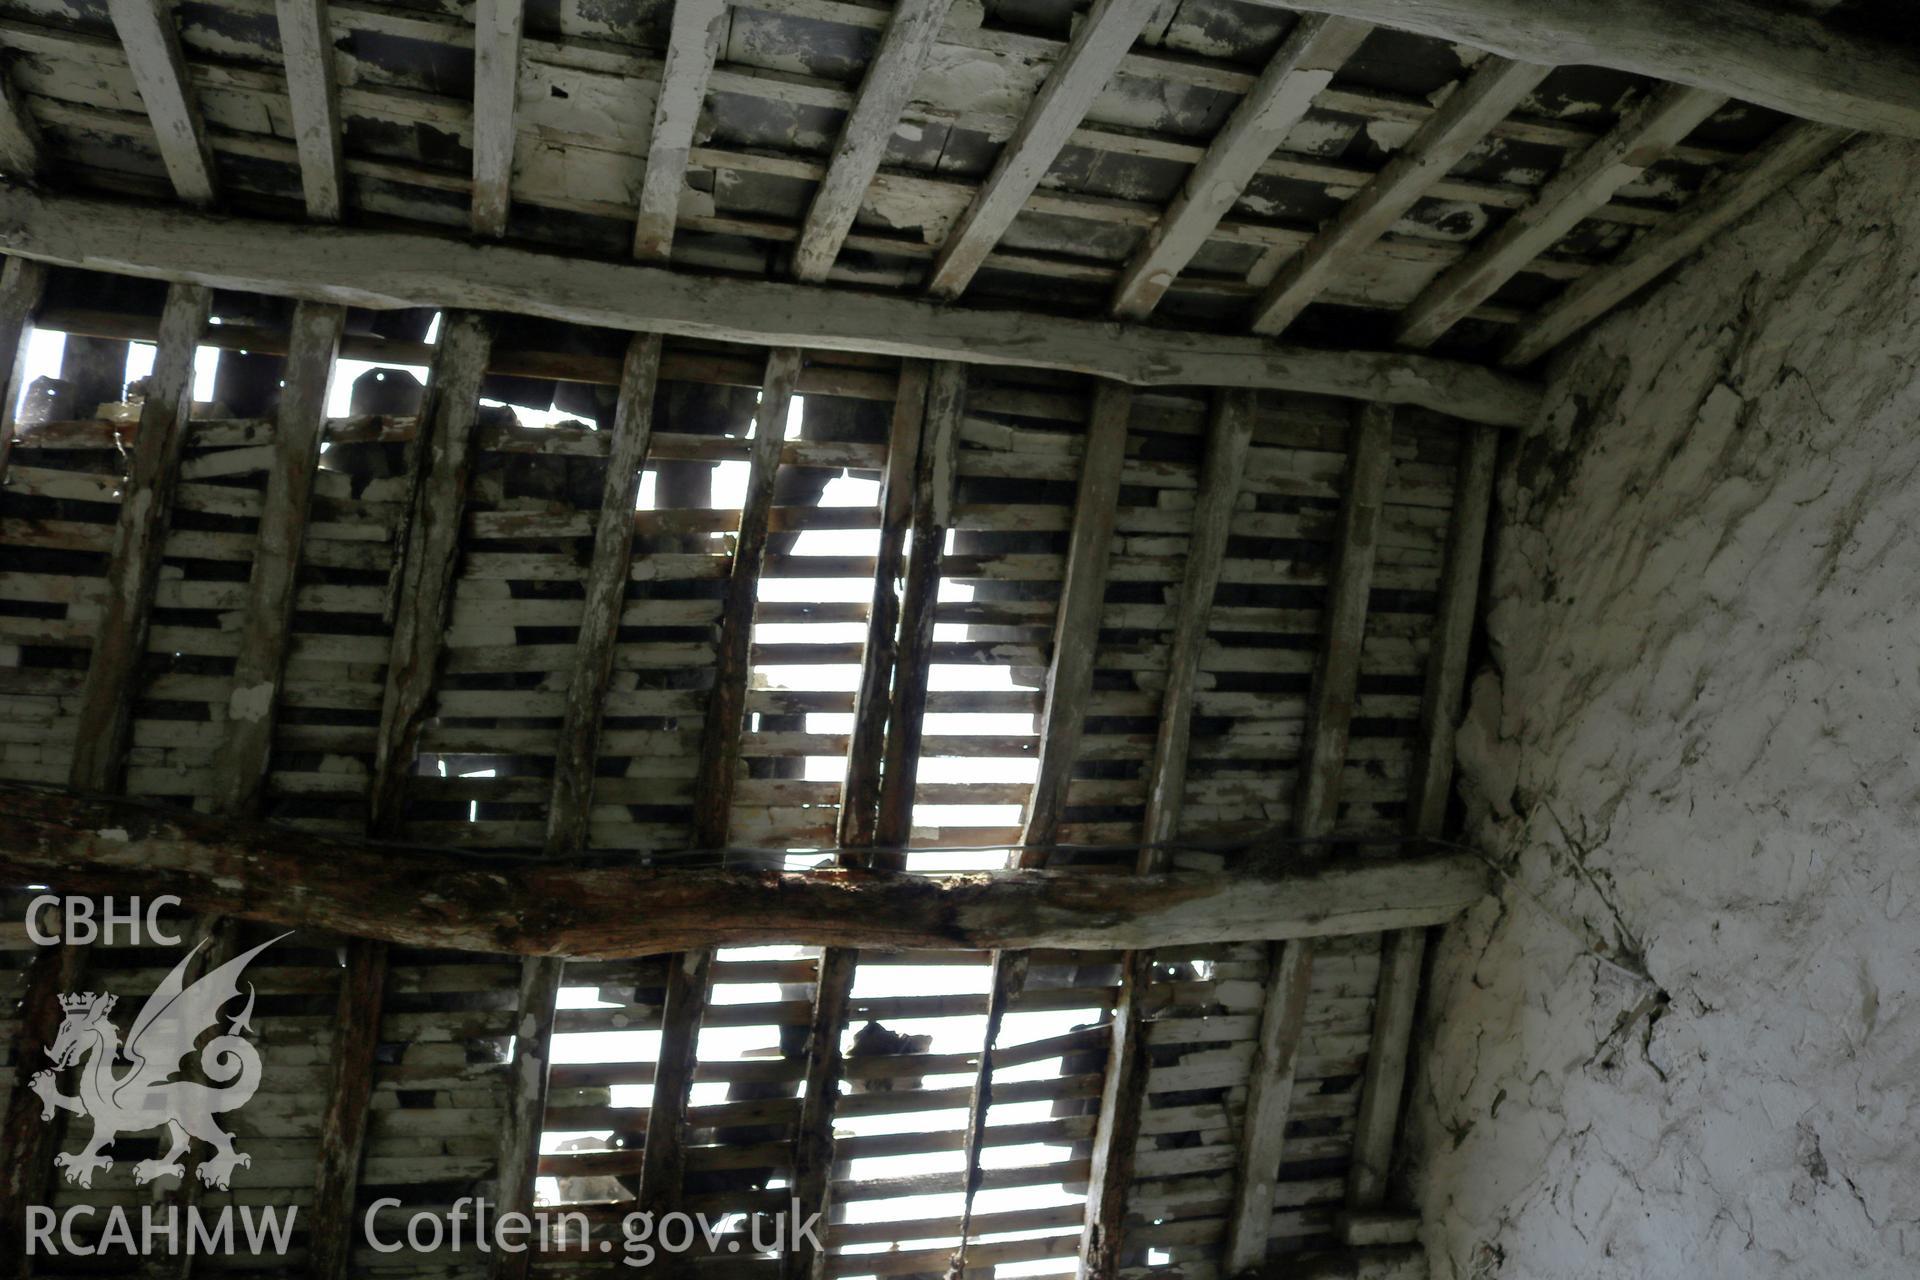 Photograph showing interior view of dairy roof, at Maes yr Hendre, taken by Dr Marian Gwyn, 6th July 2016. (Original Reference no. 0251)